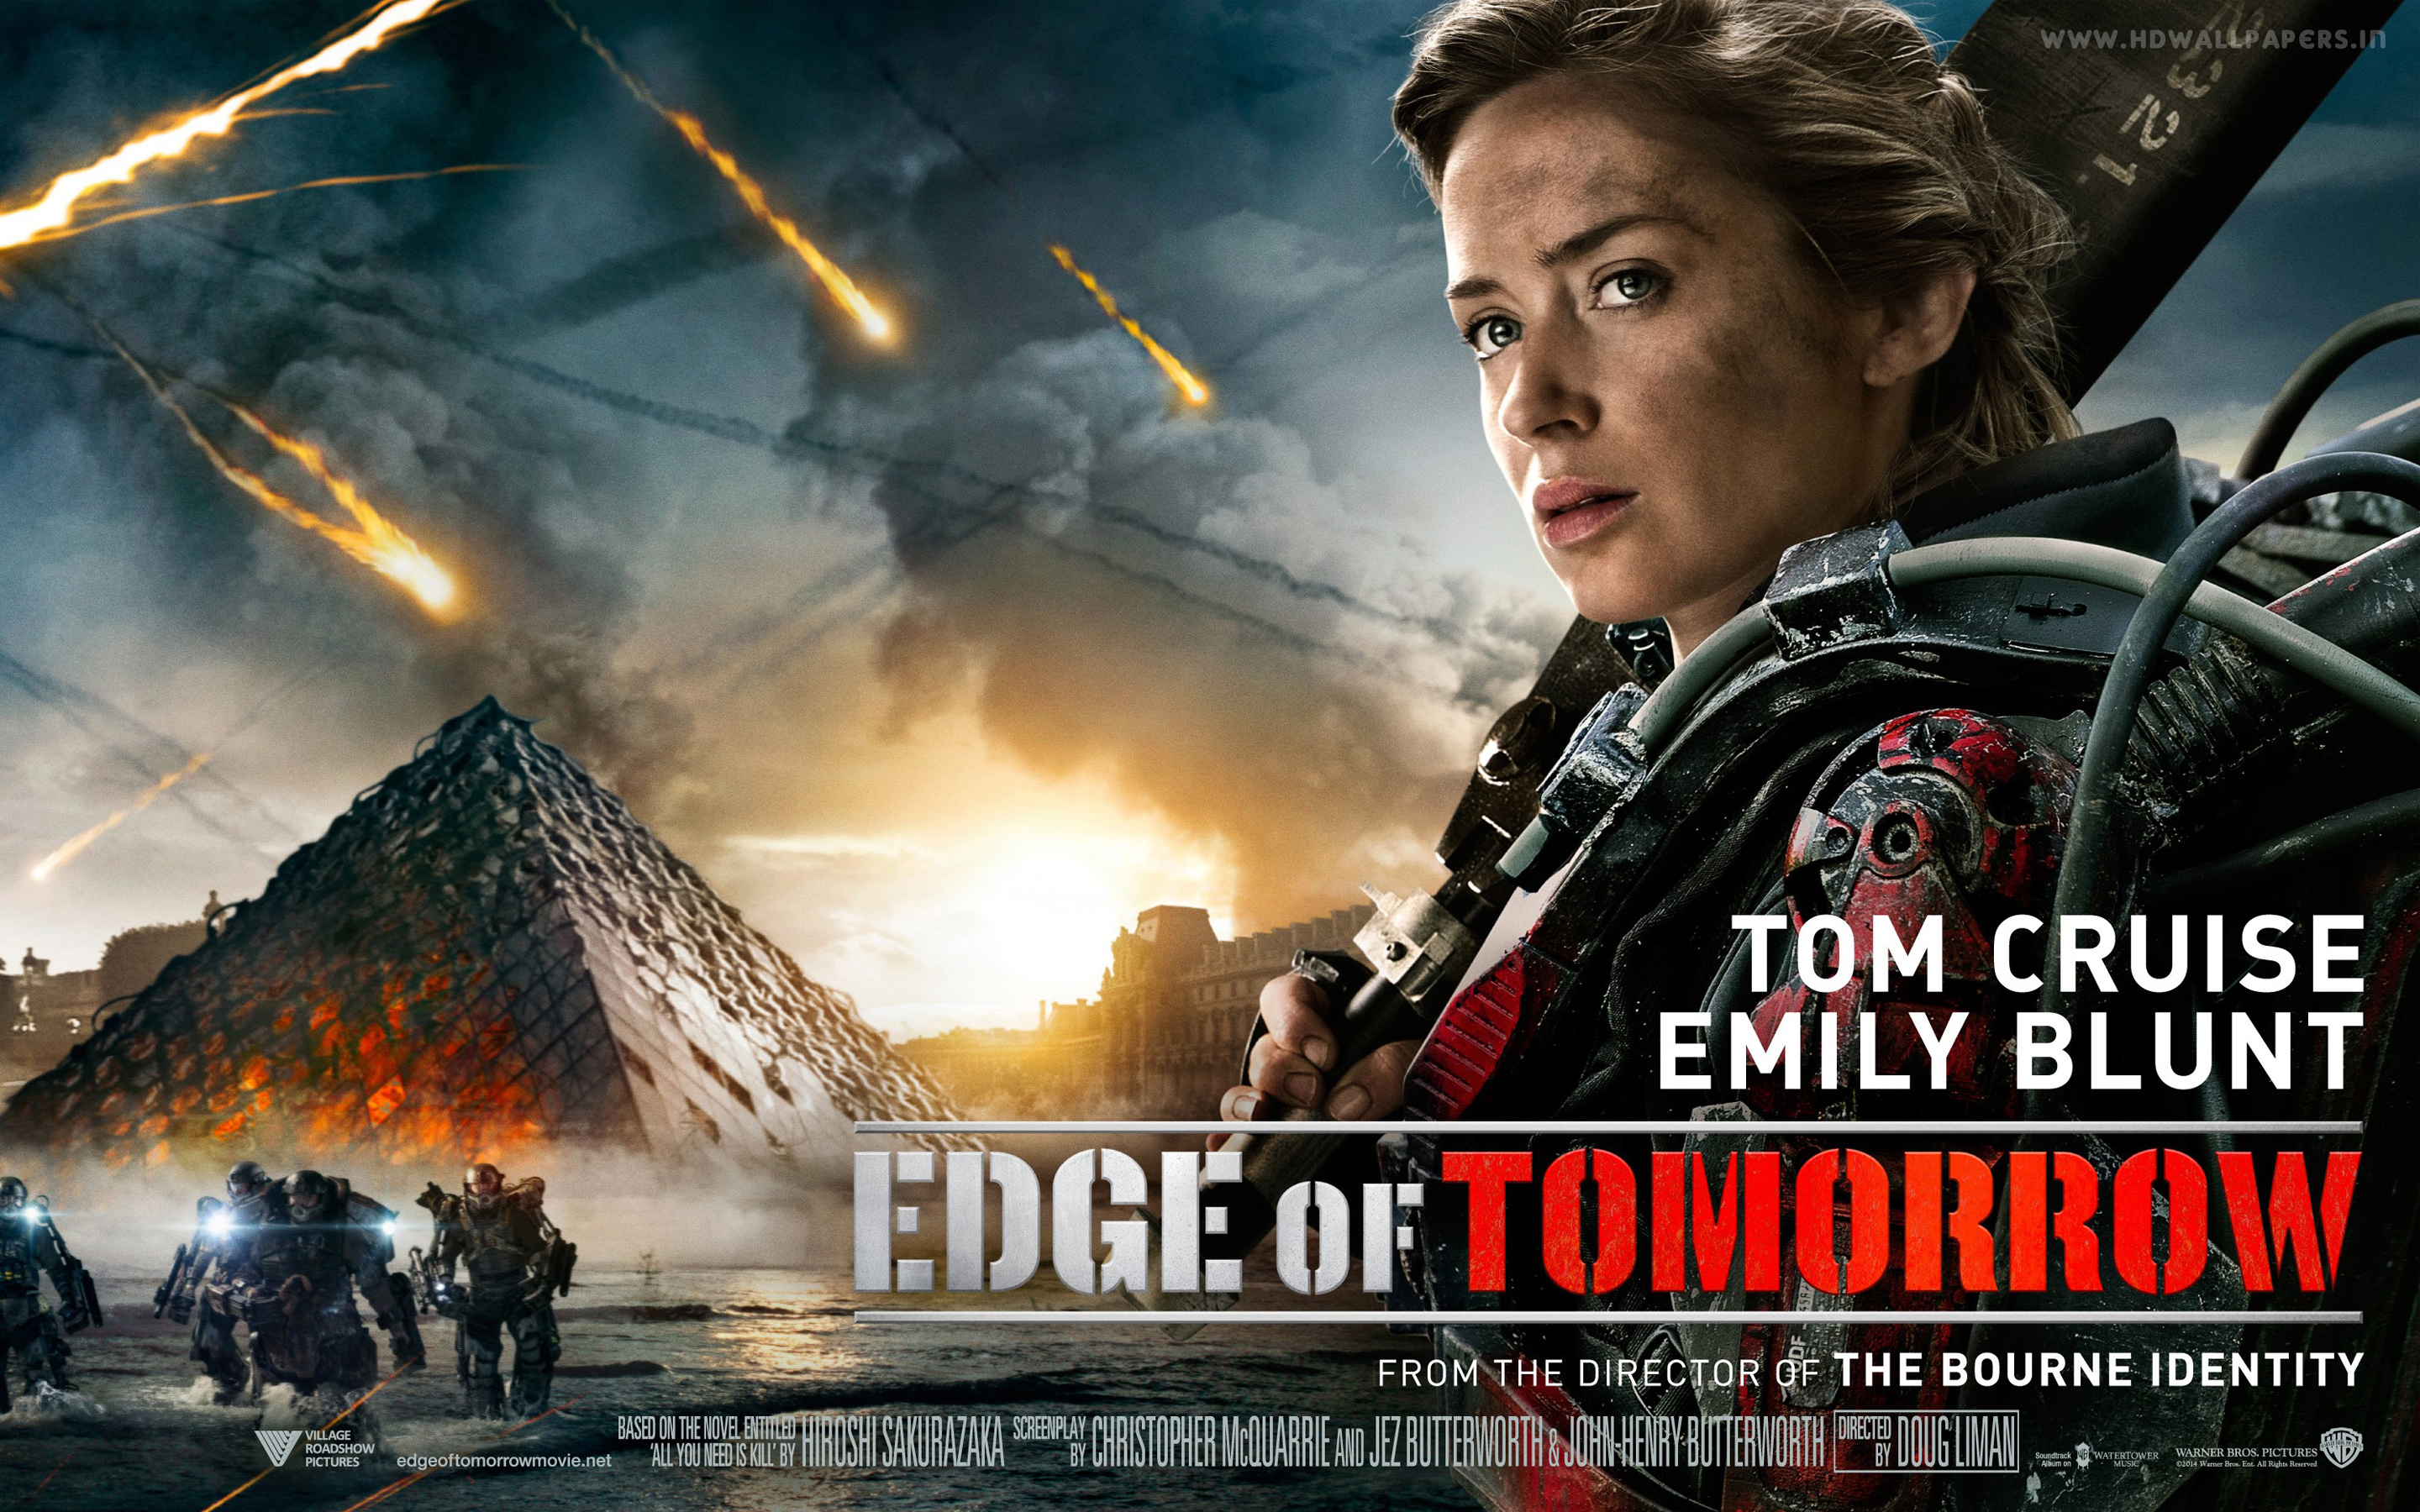 Edge Of Tomorrow Review - Emily Blunt as Rita at the Louvre